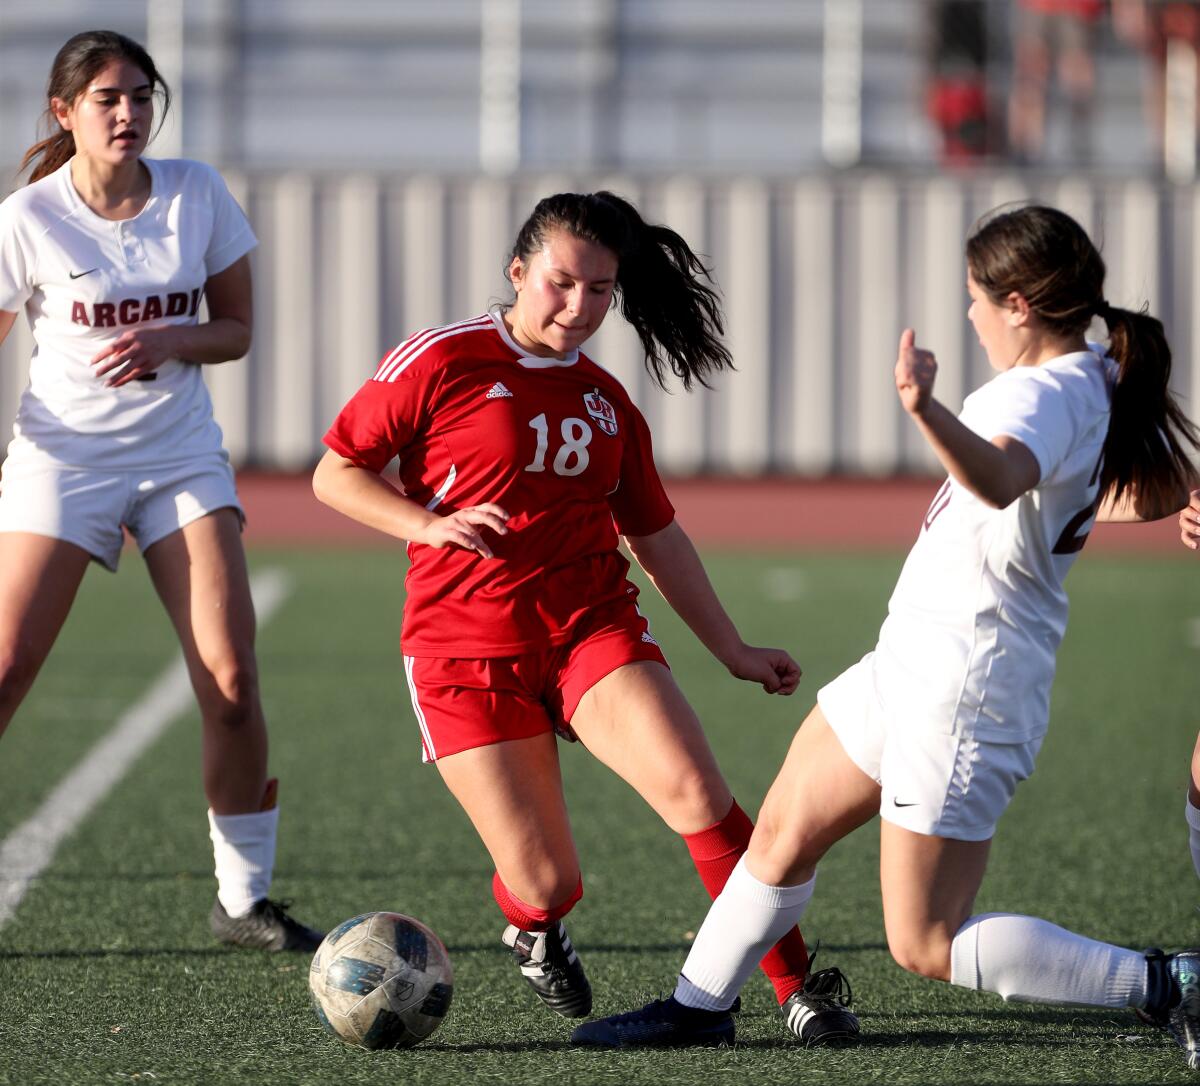 Burroughs High's Viviana Medina, left, controls the ball during Tuesday's Pacific League match against Arcadia at Memorial Field.